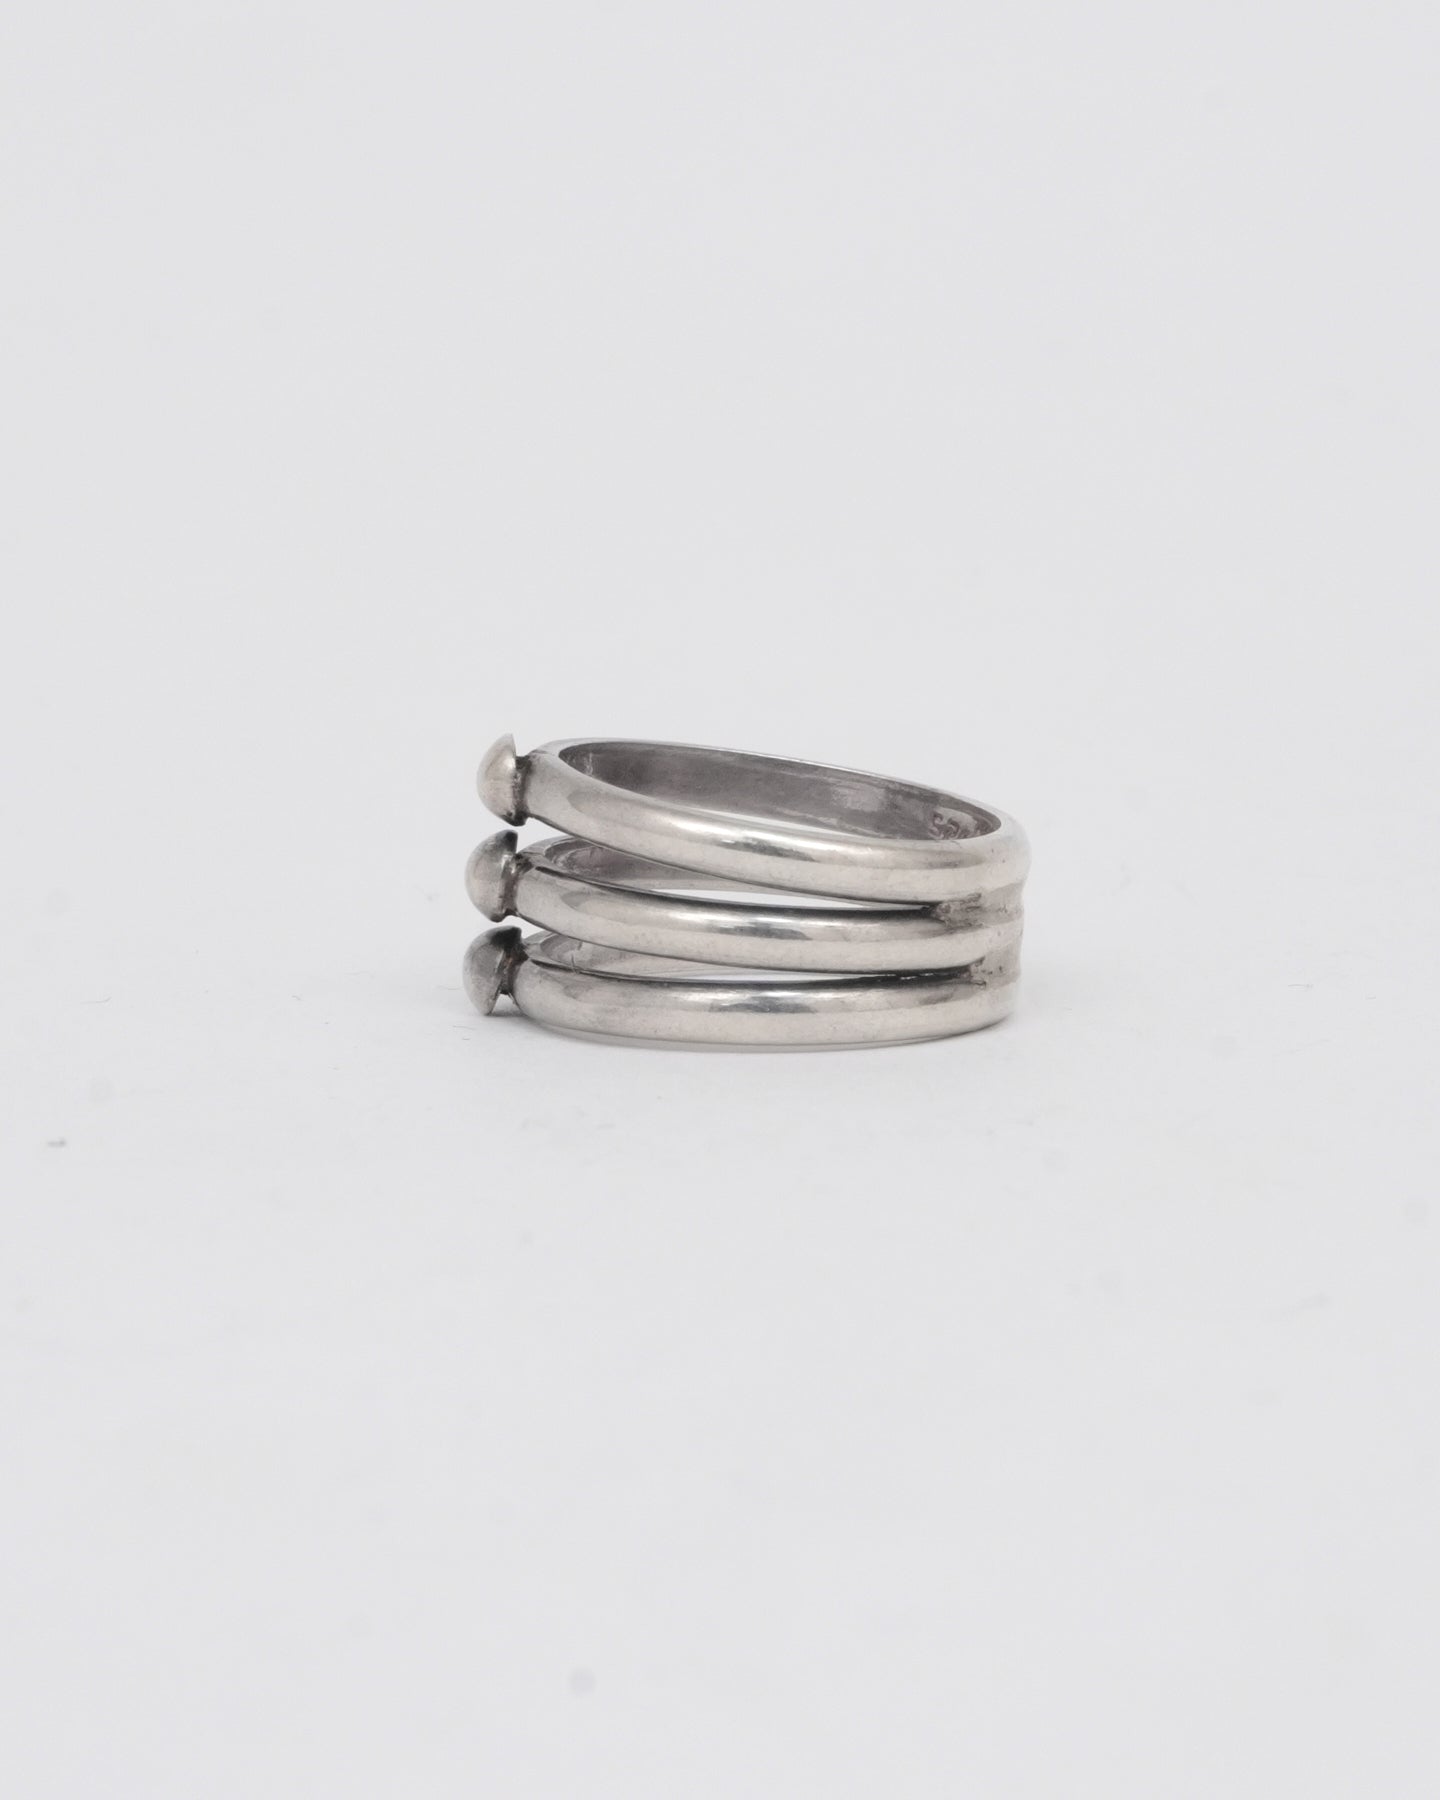 Silver Ring: Size18.5